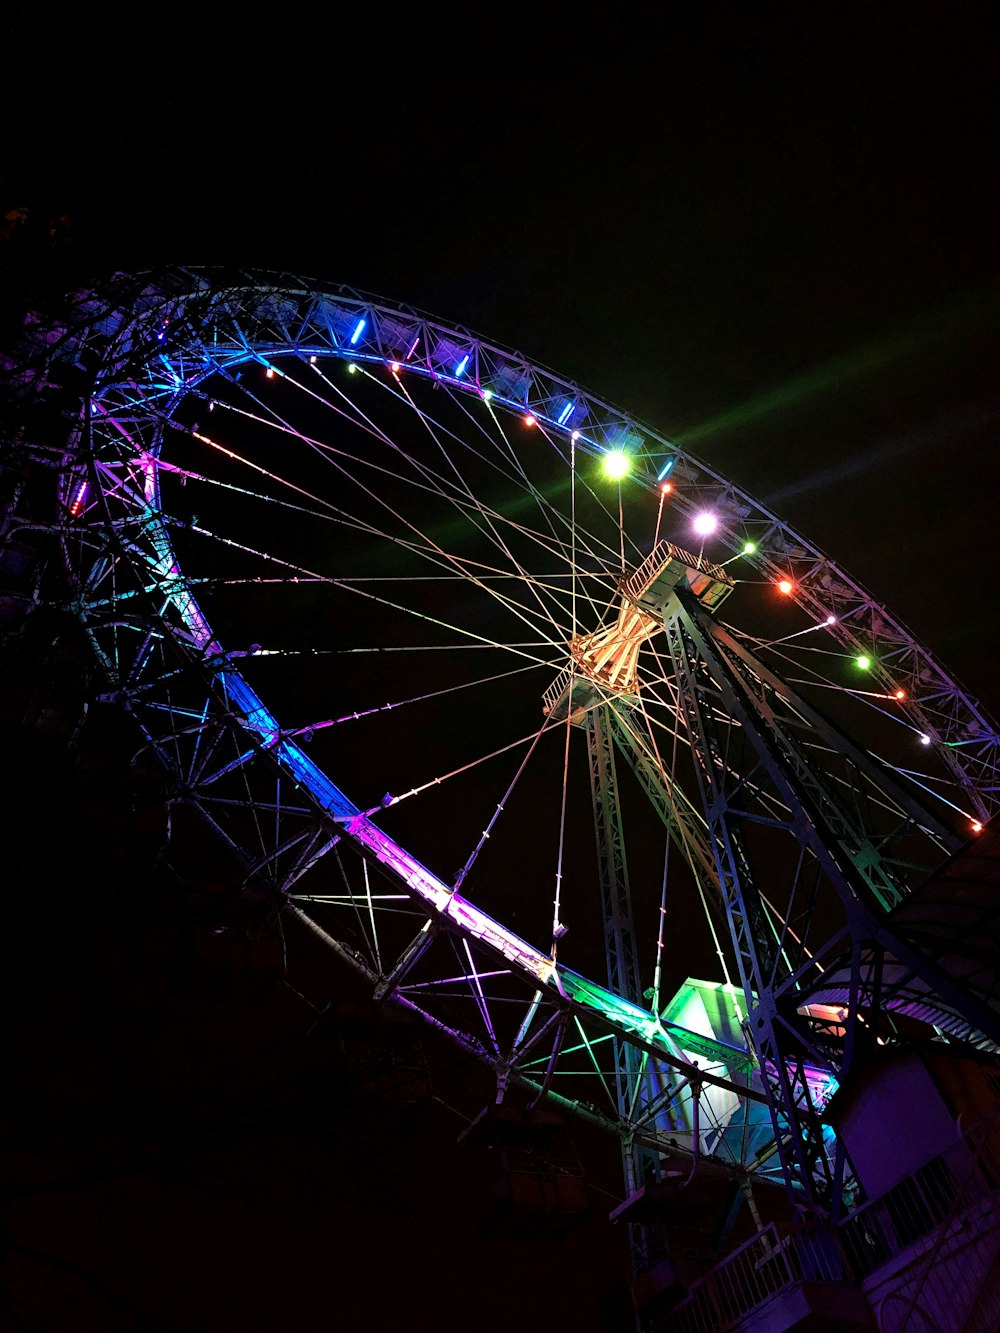 purple and white ferris wheel during night time